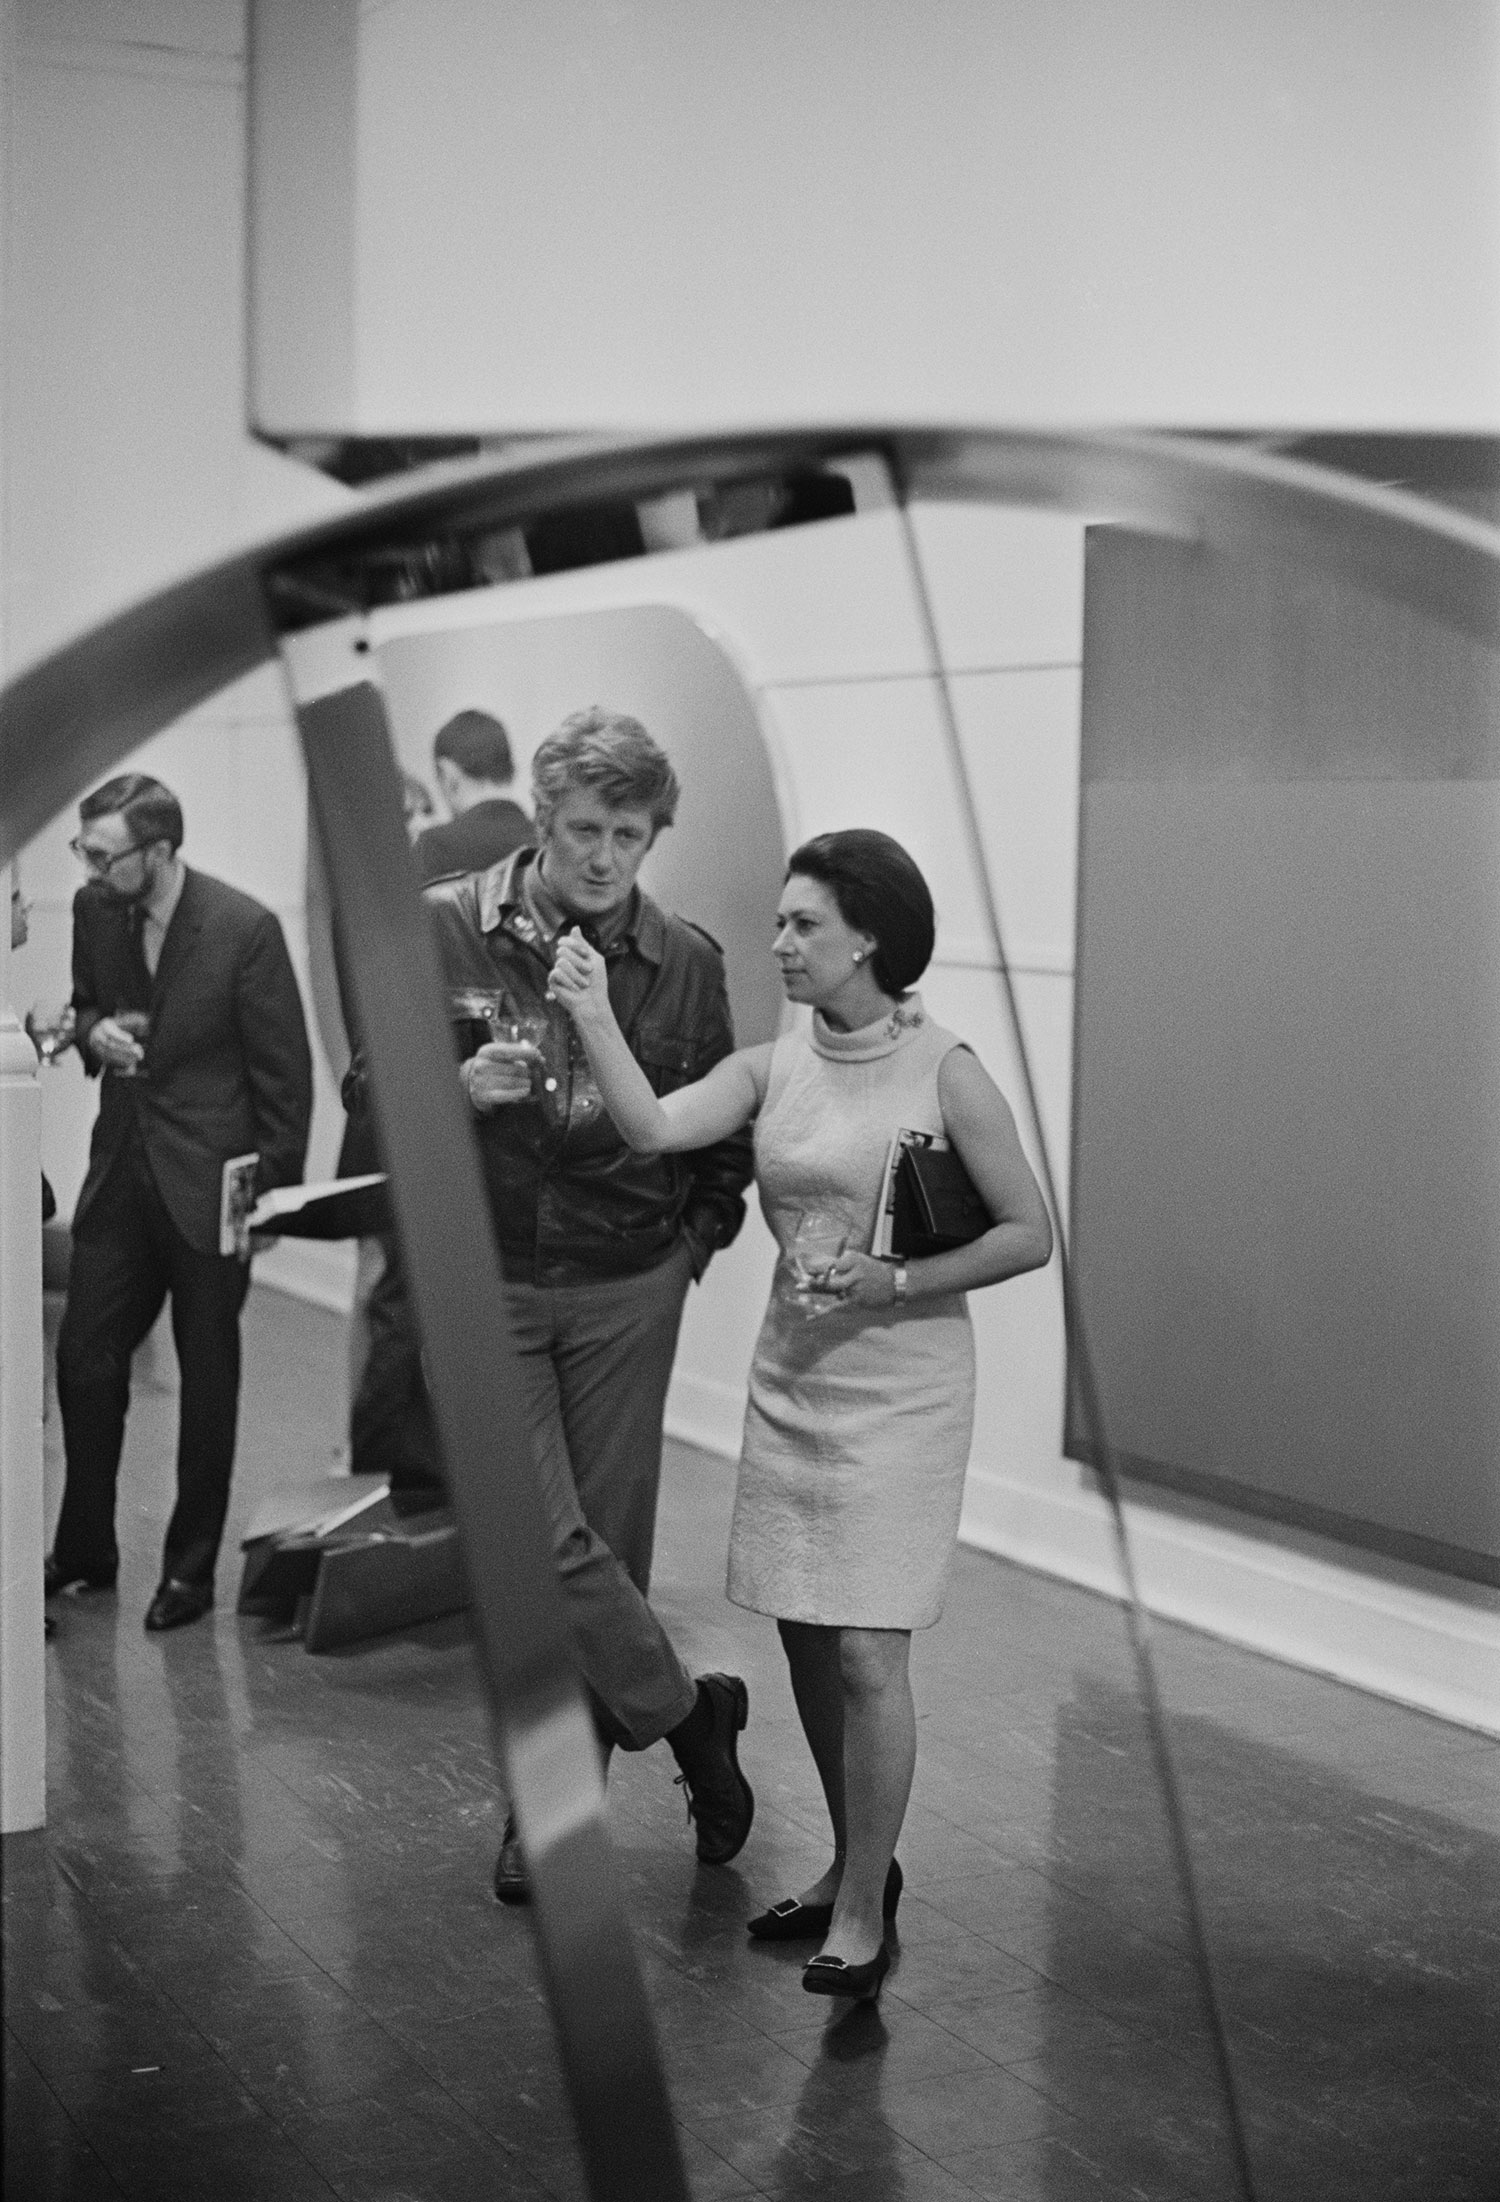 Princess Margaret with her husband Antony Armstrong-Jones at the Whitechapel Gallery, London, May 17, 1968